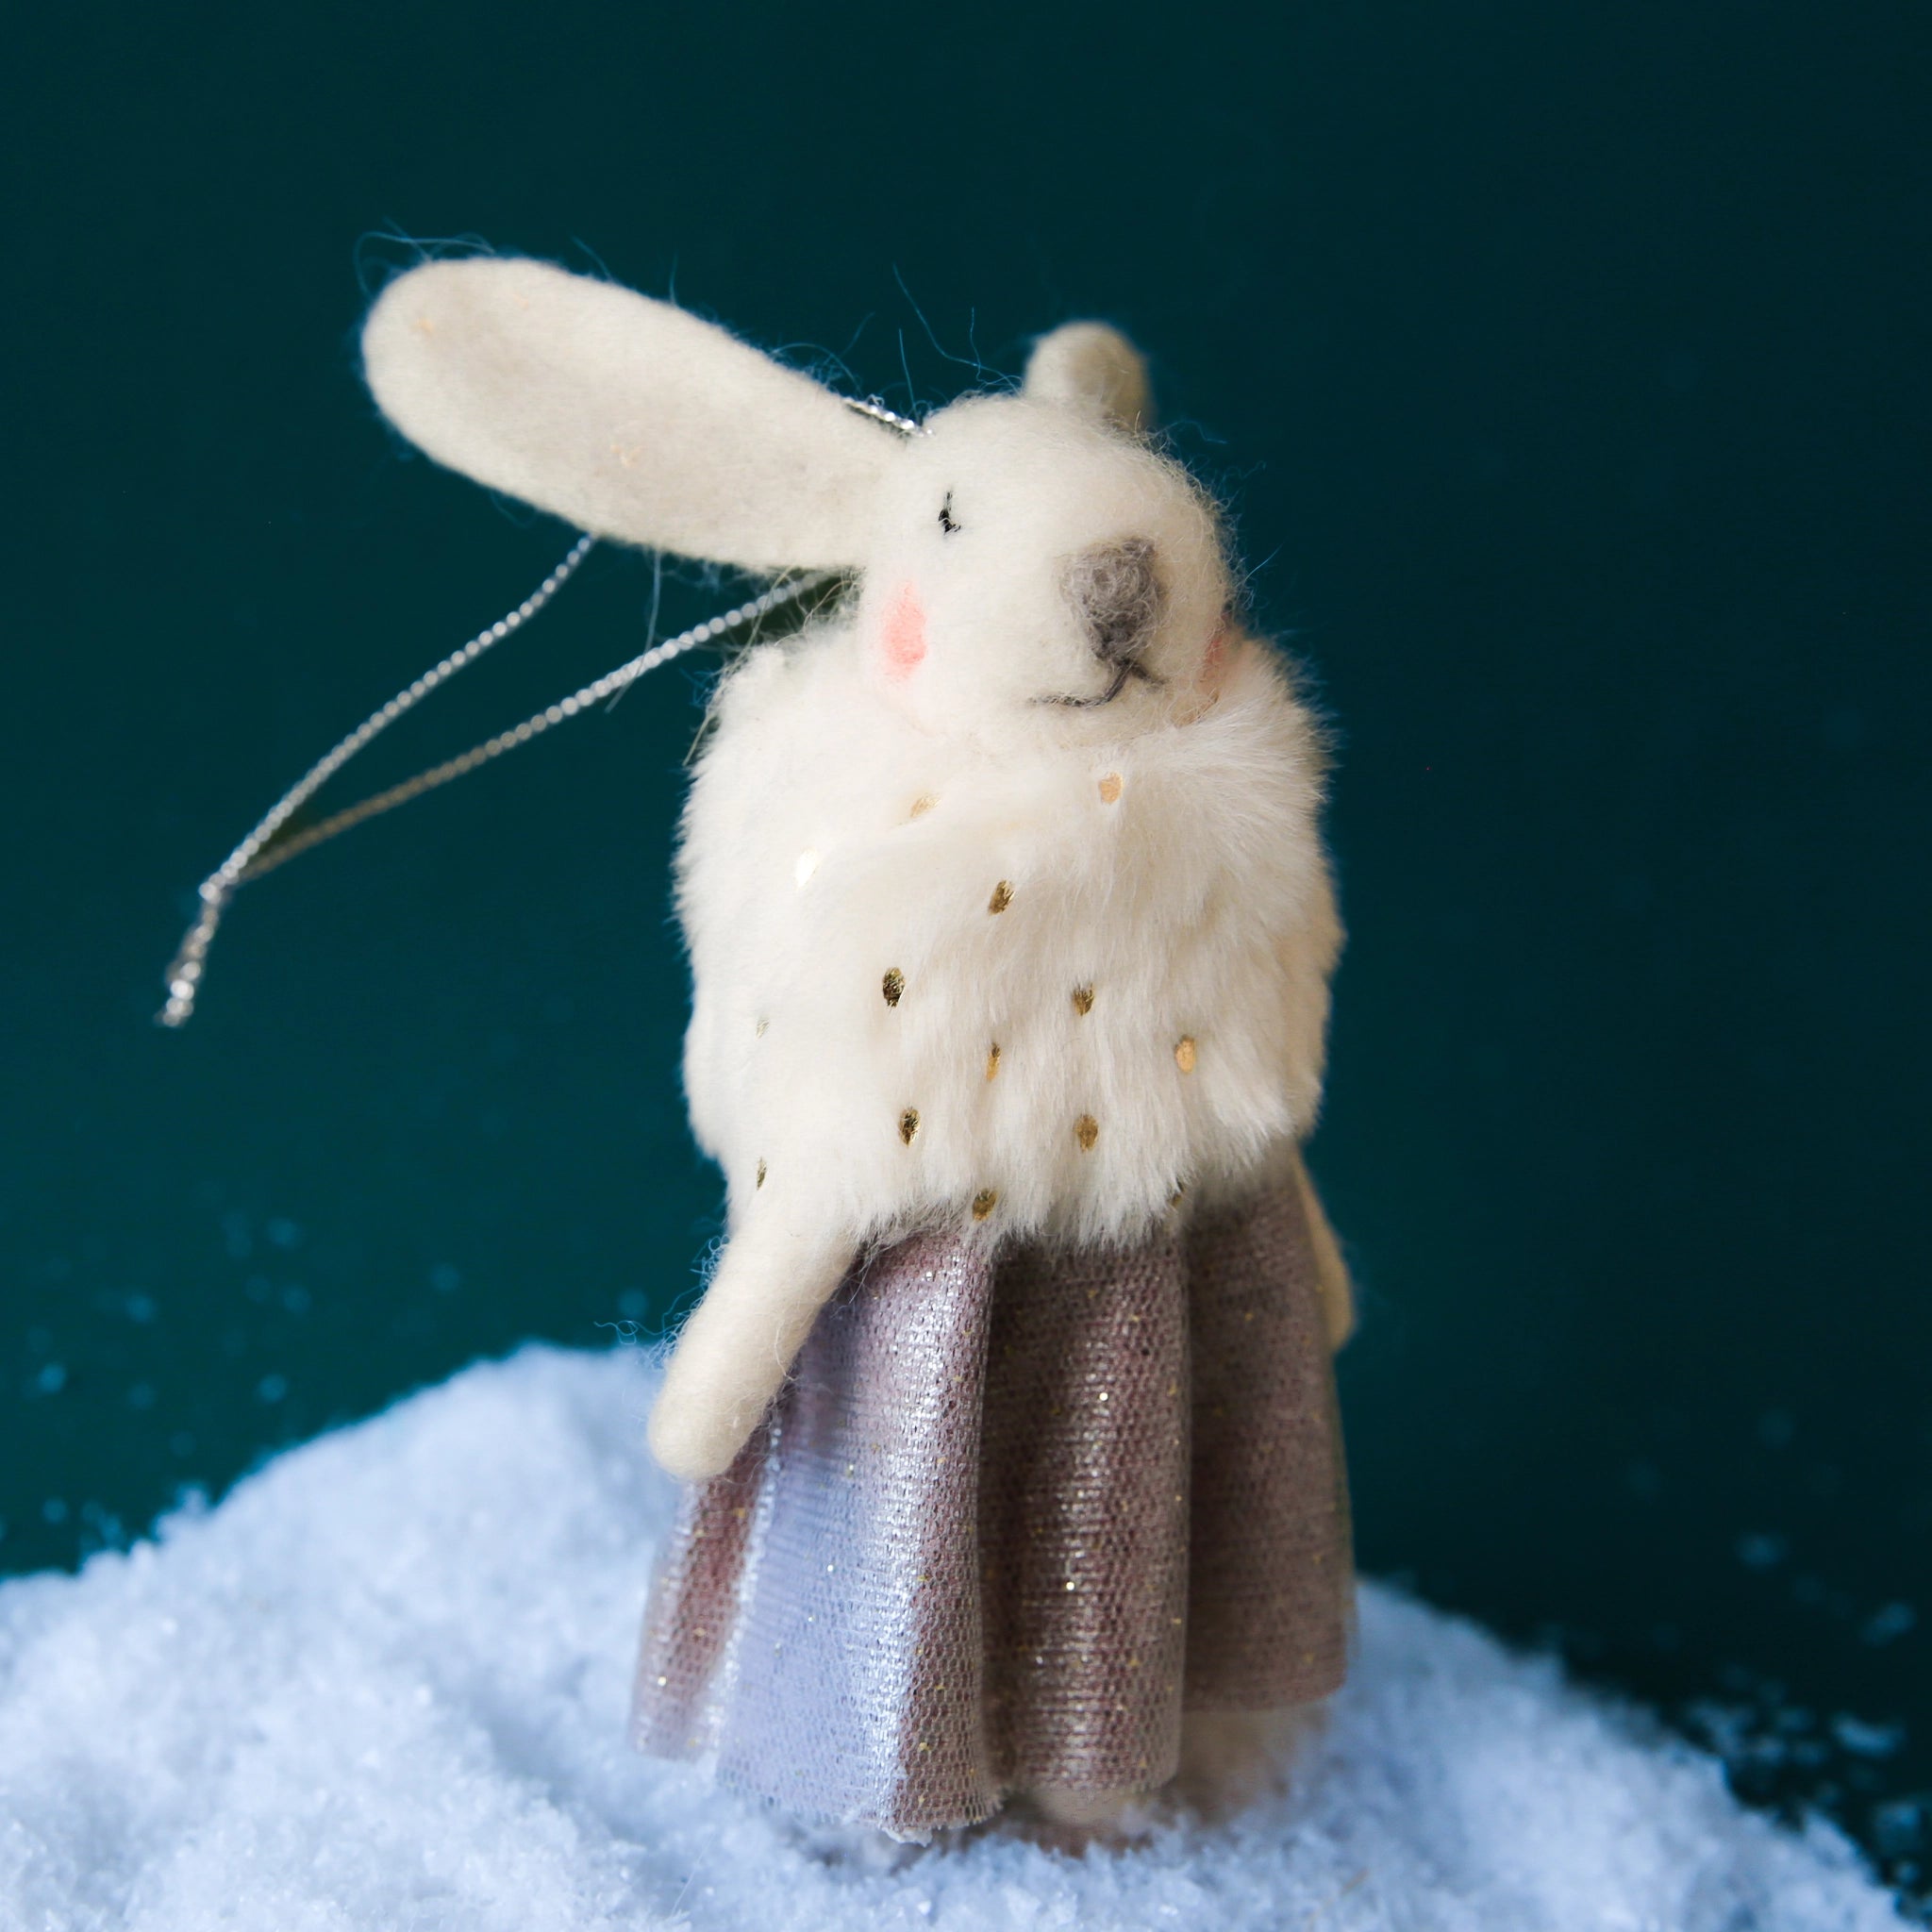 On a dark green background is a white felt bunny ornament in a fancy dress and fur scarf. 